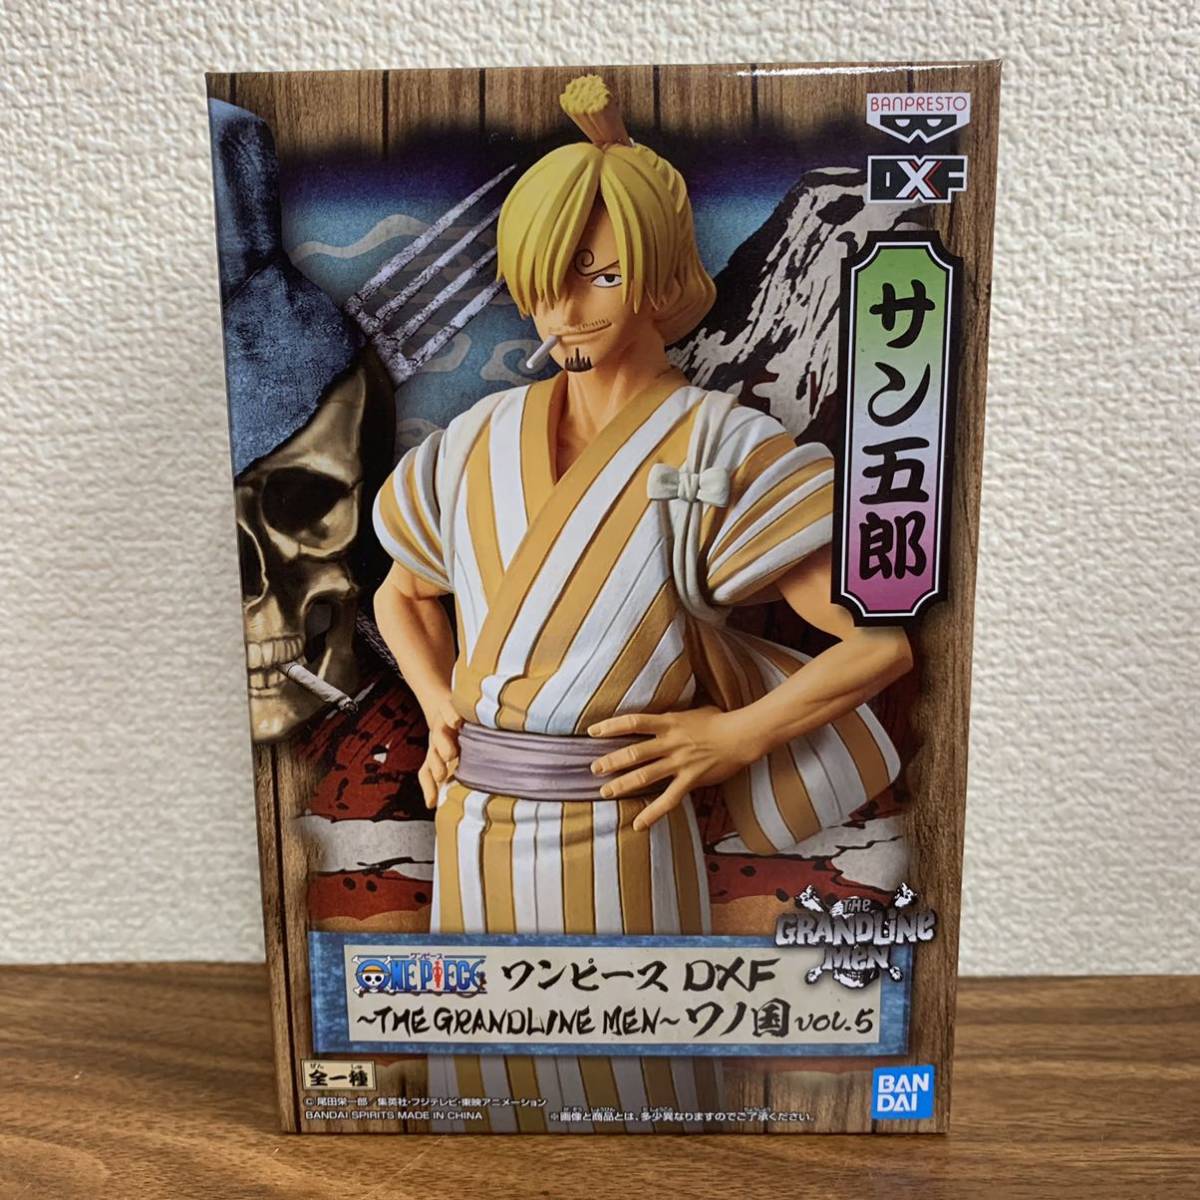  number 3 piece equipped * unopened One-piece DXF~THE GRANDLINE MEN~wano country vol.5 sun .. Sanji figure 2J-015